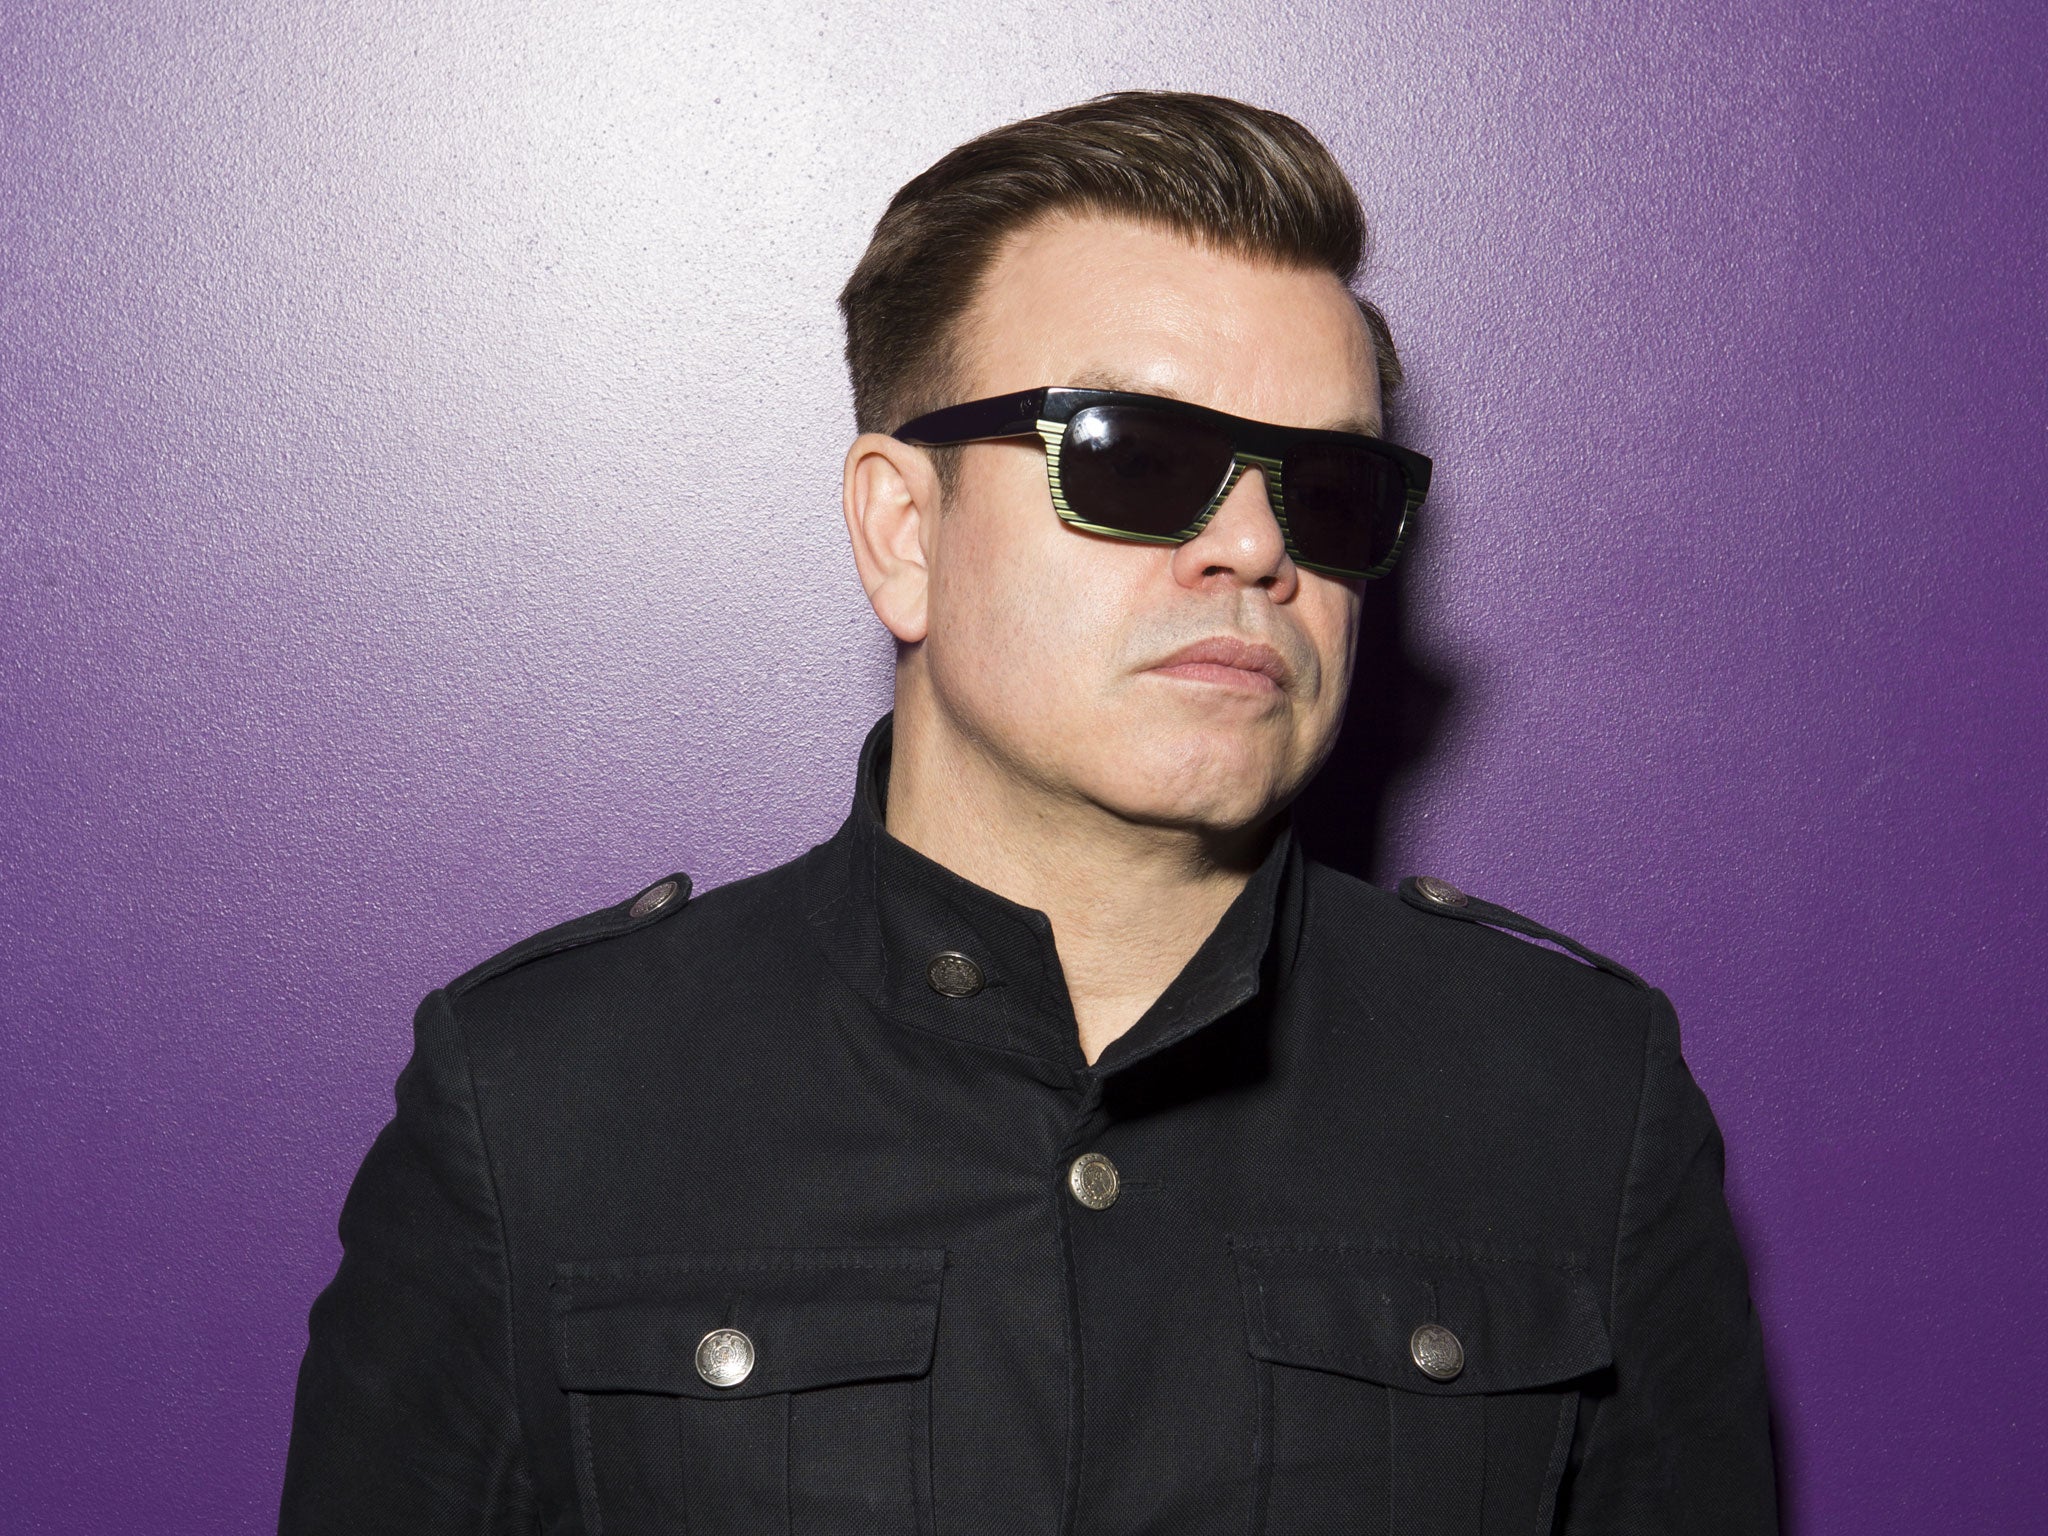 The DJ Paul Oakenfold has emerged as the unlikely champion of a new campaign warning of the dangers of loud music